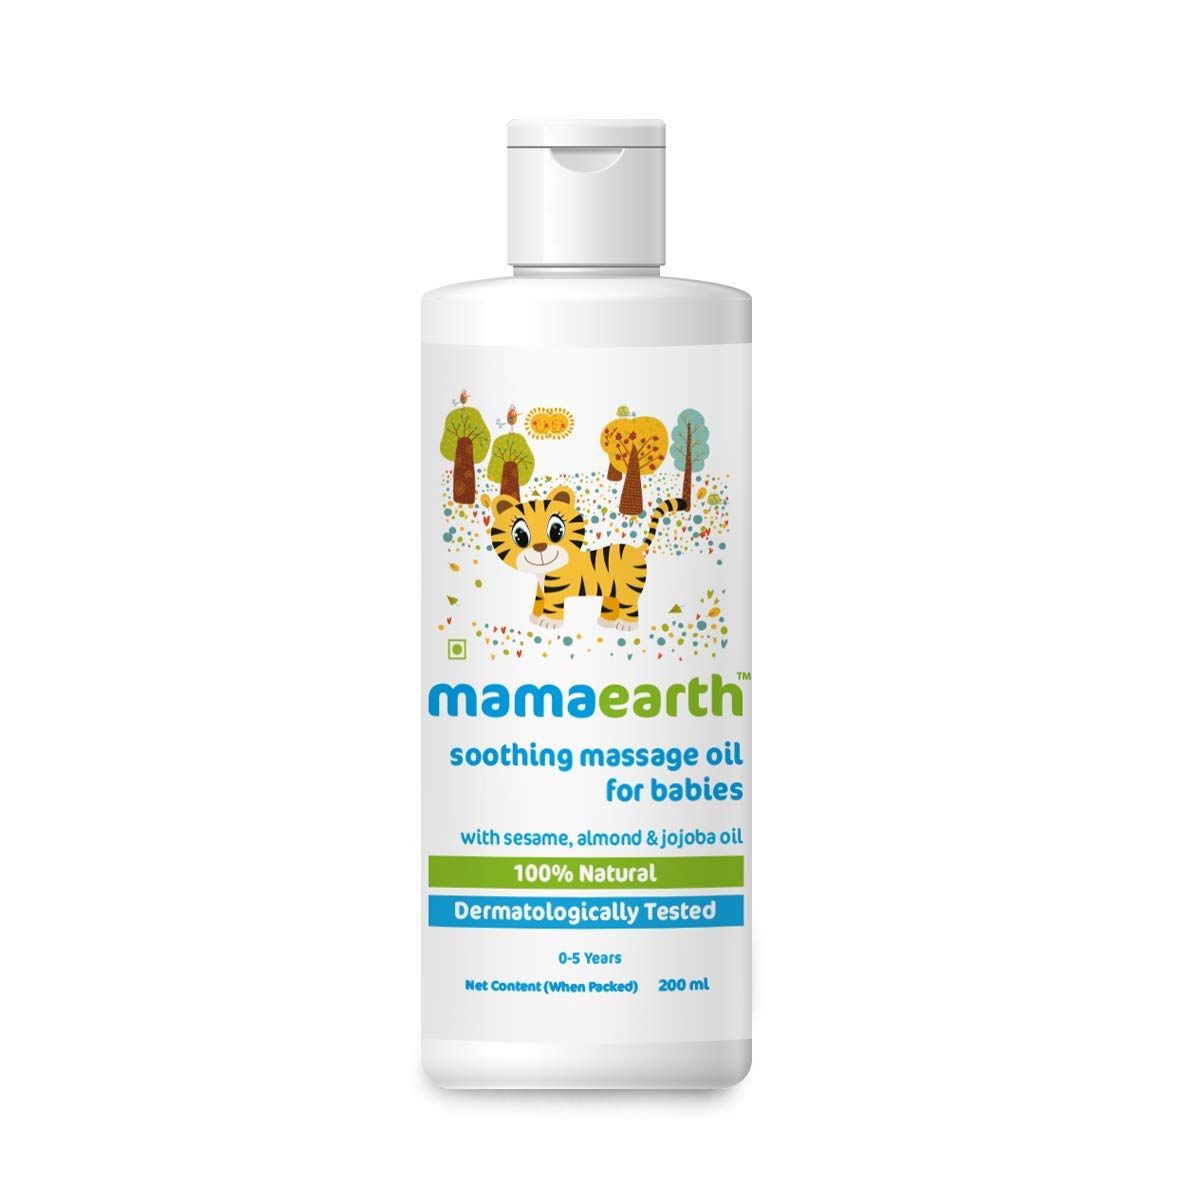 Soothing Massage Oil for Babies with Sesame, Almond and Jojoba Oil - 200ml